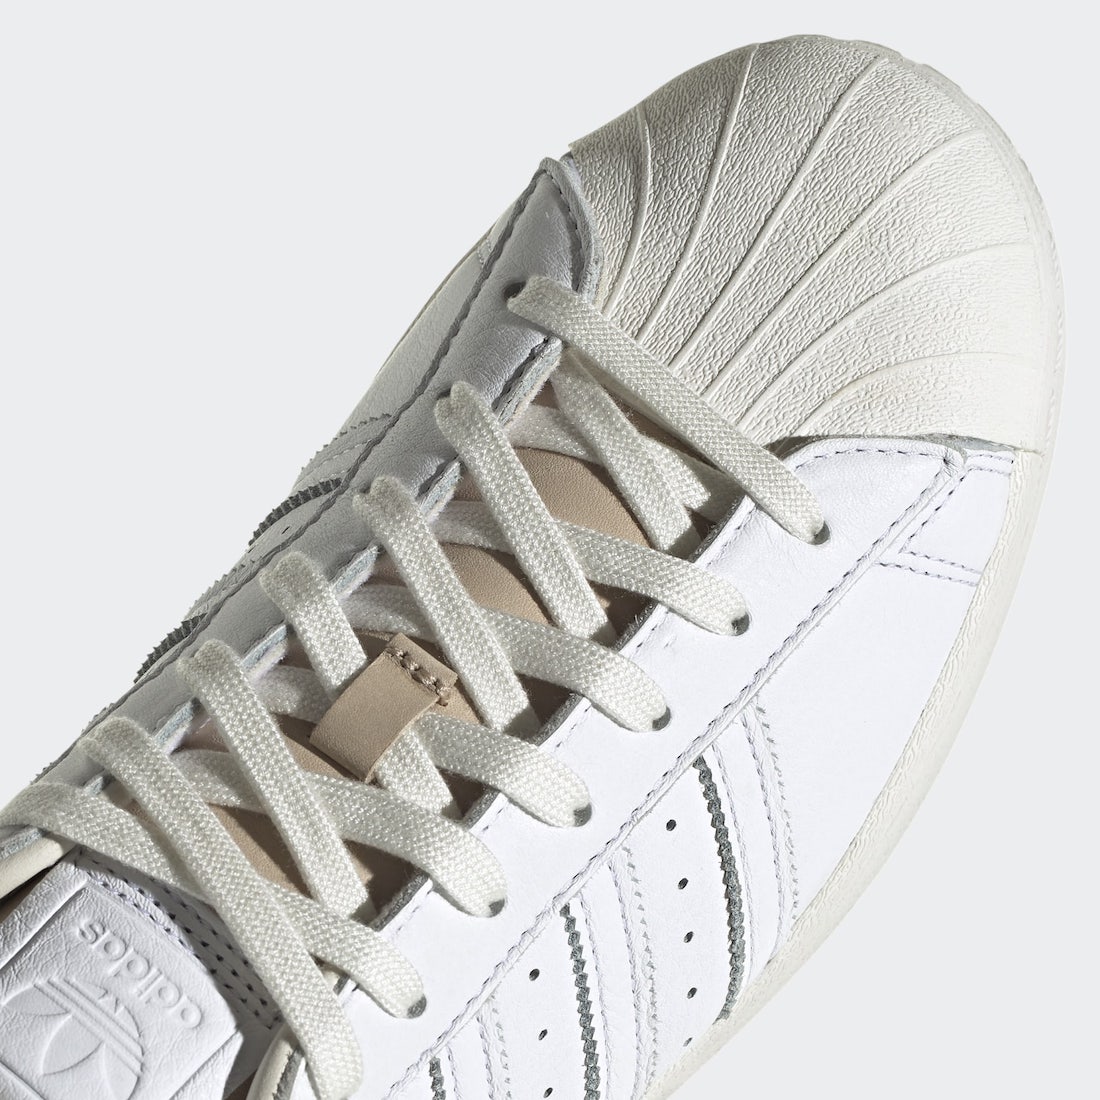 adidas Superstar White Tan FY5477 Release Date Info